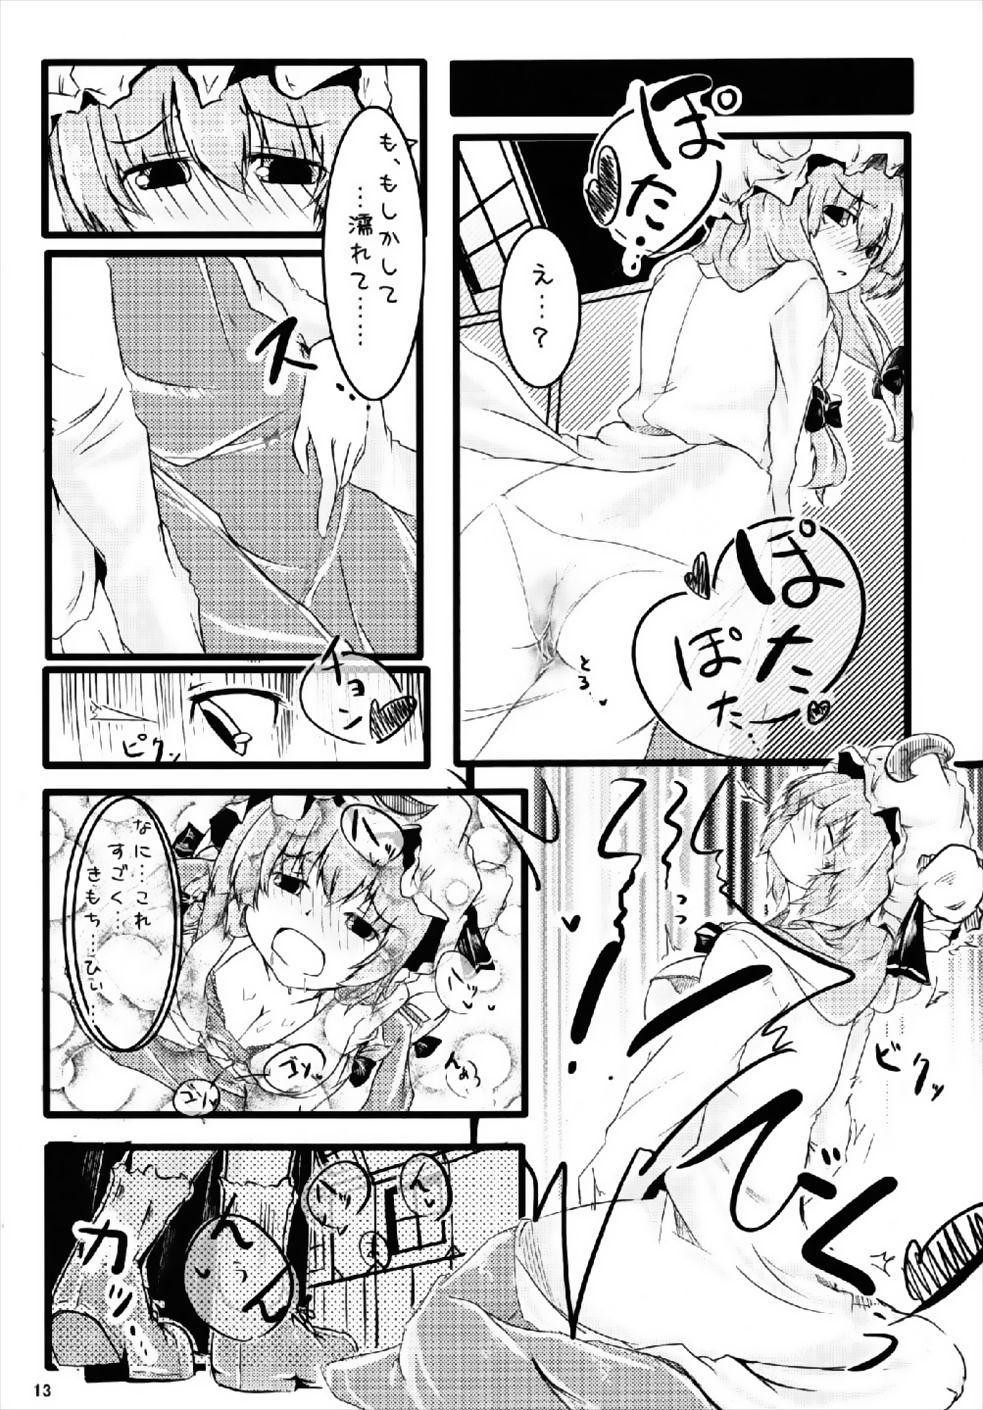 Latex RemiFlaPatche! - Touhou project Caught - Page 12